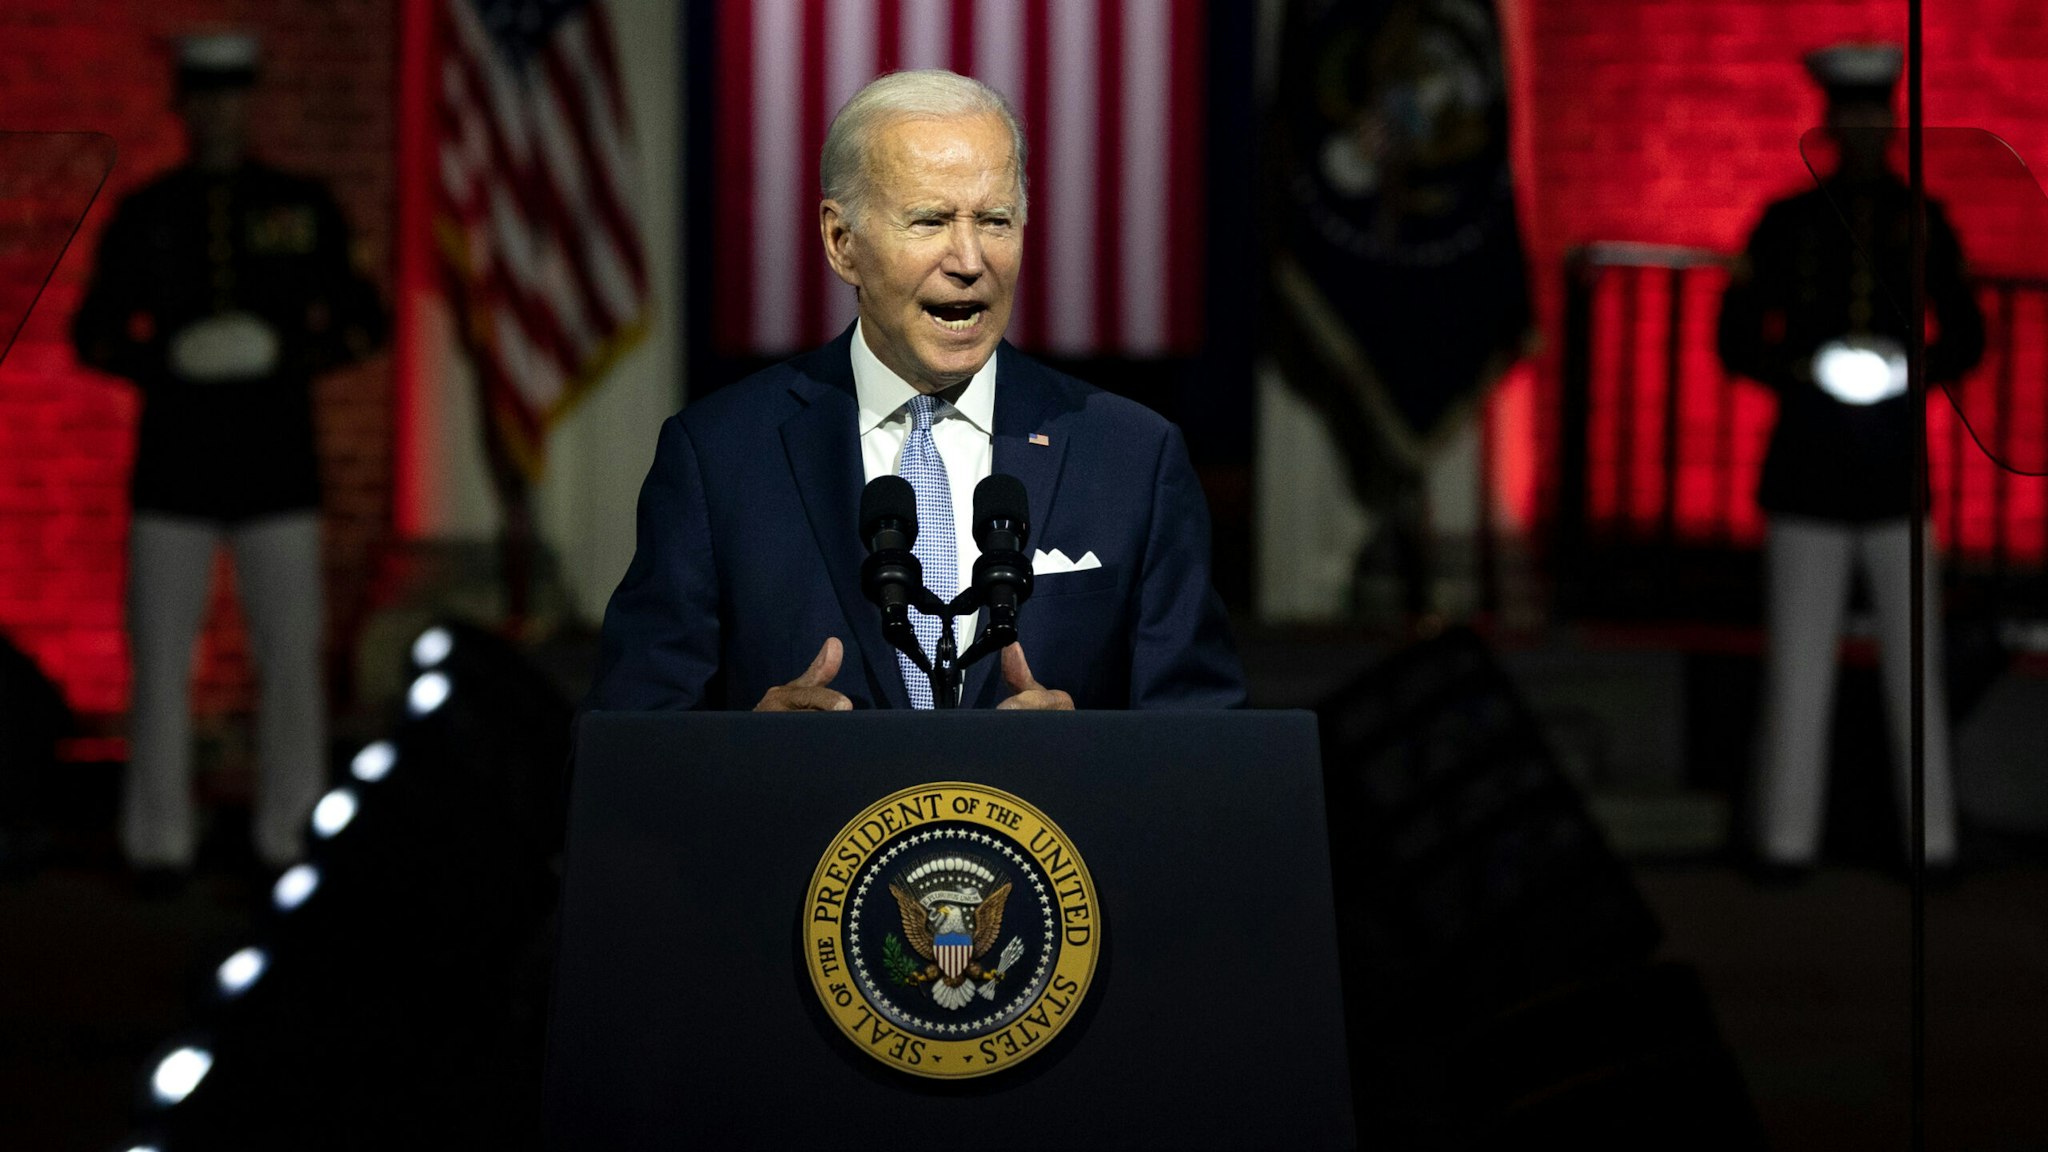 US President Joe Biden speaks at Independence National Historical Park in Philadelphia, Pennsylvania, US, on Thursday, Sept. 1, 2022. Biden is arguing that Donald Trump's supporters pose a threat to US democracy and the country's elections during an address billed as the "battle for the soul of the nation."